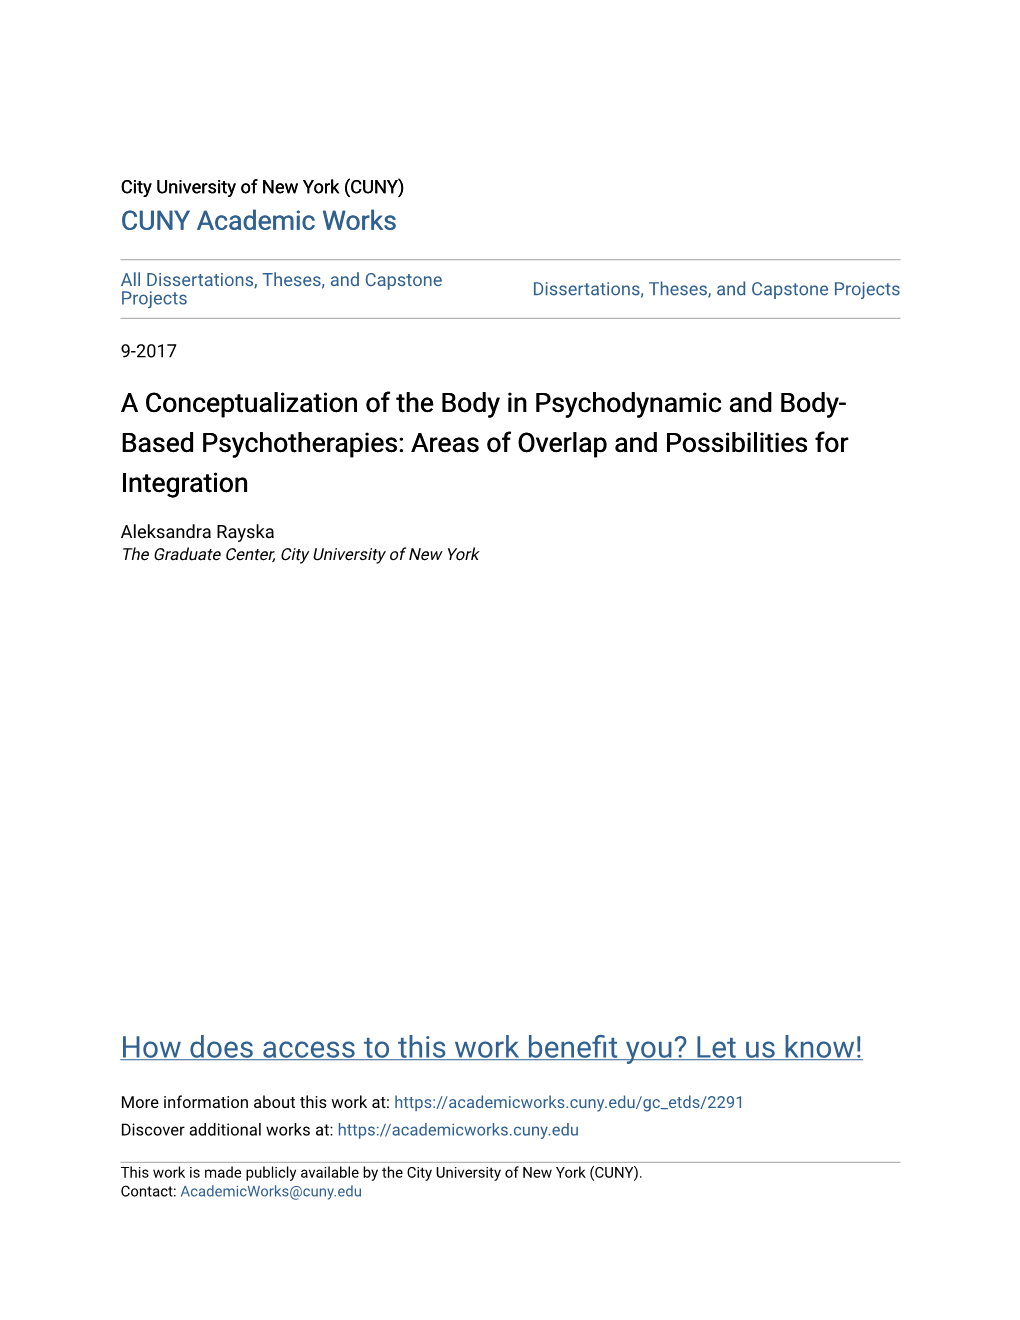 A Conceptualization of the Body in Psychodynamic and Body- Based Psychotherapies: Areas of Overlap and Possibilities for Integration